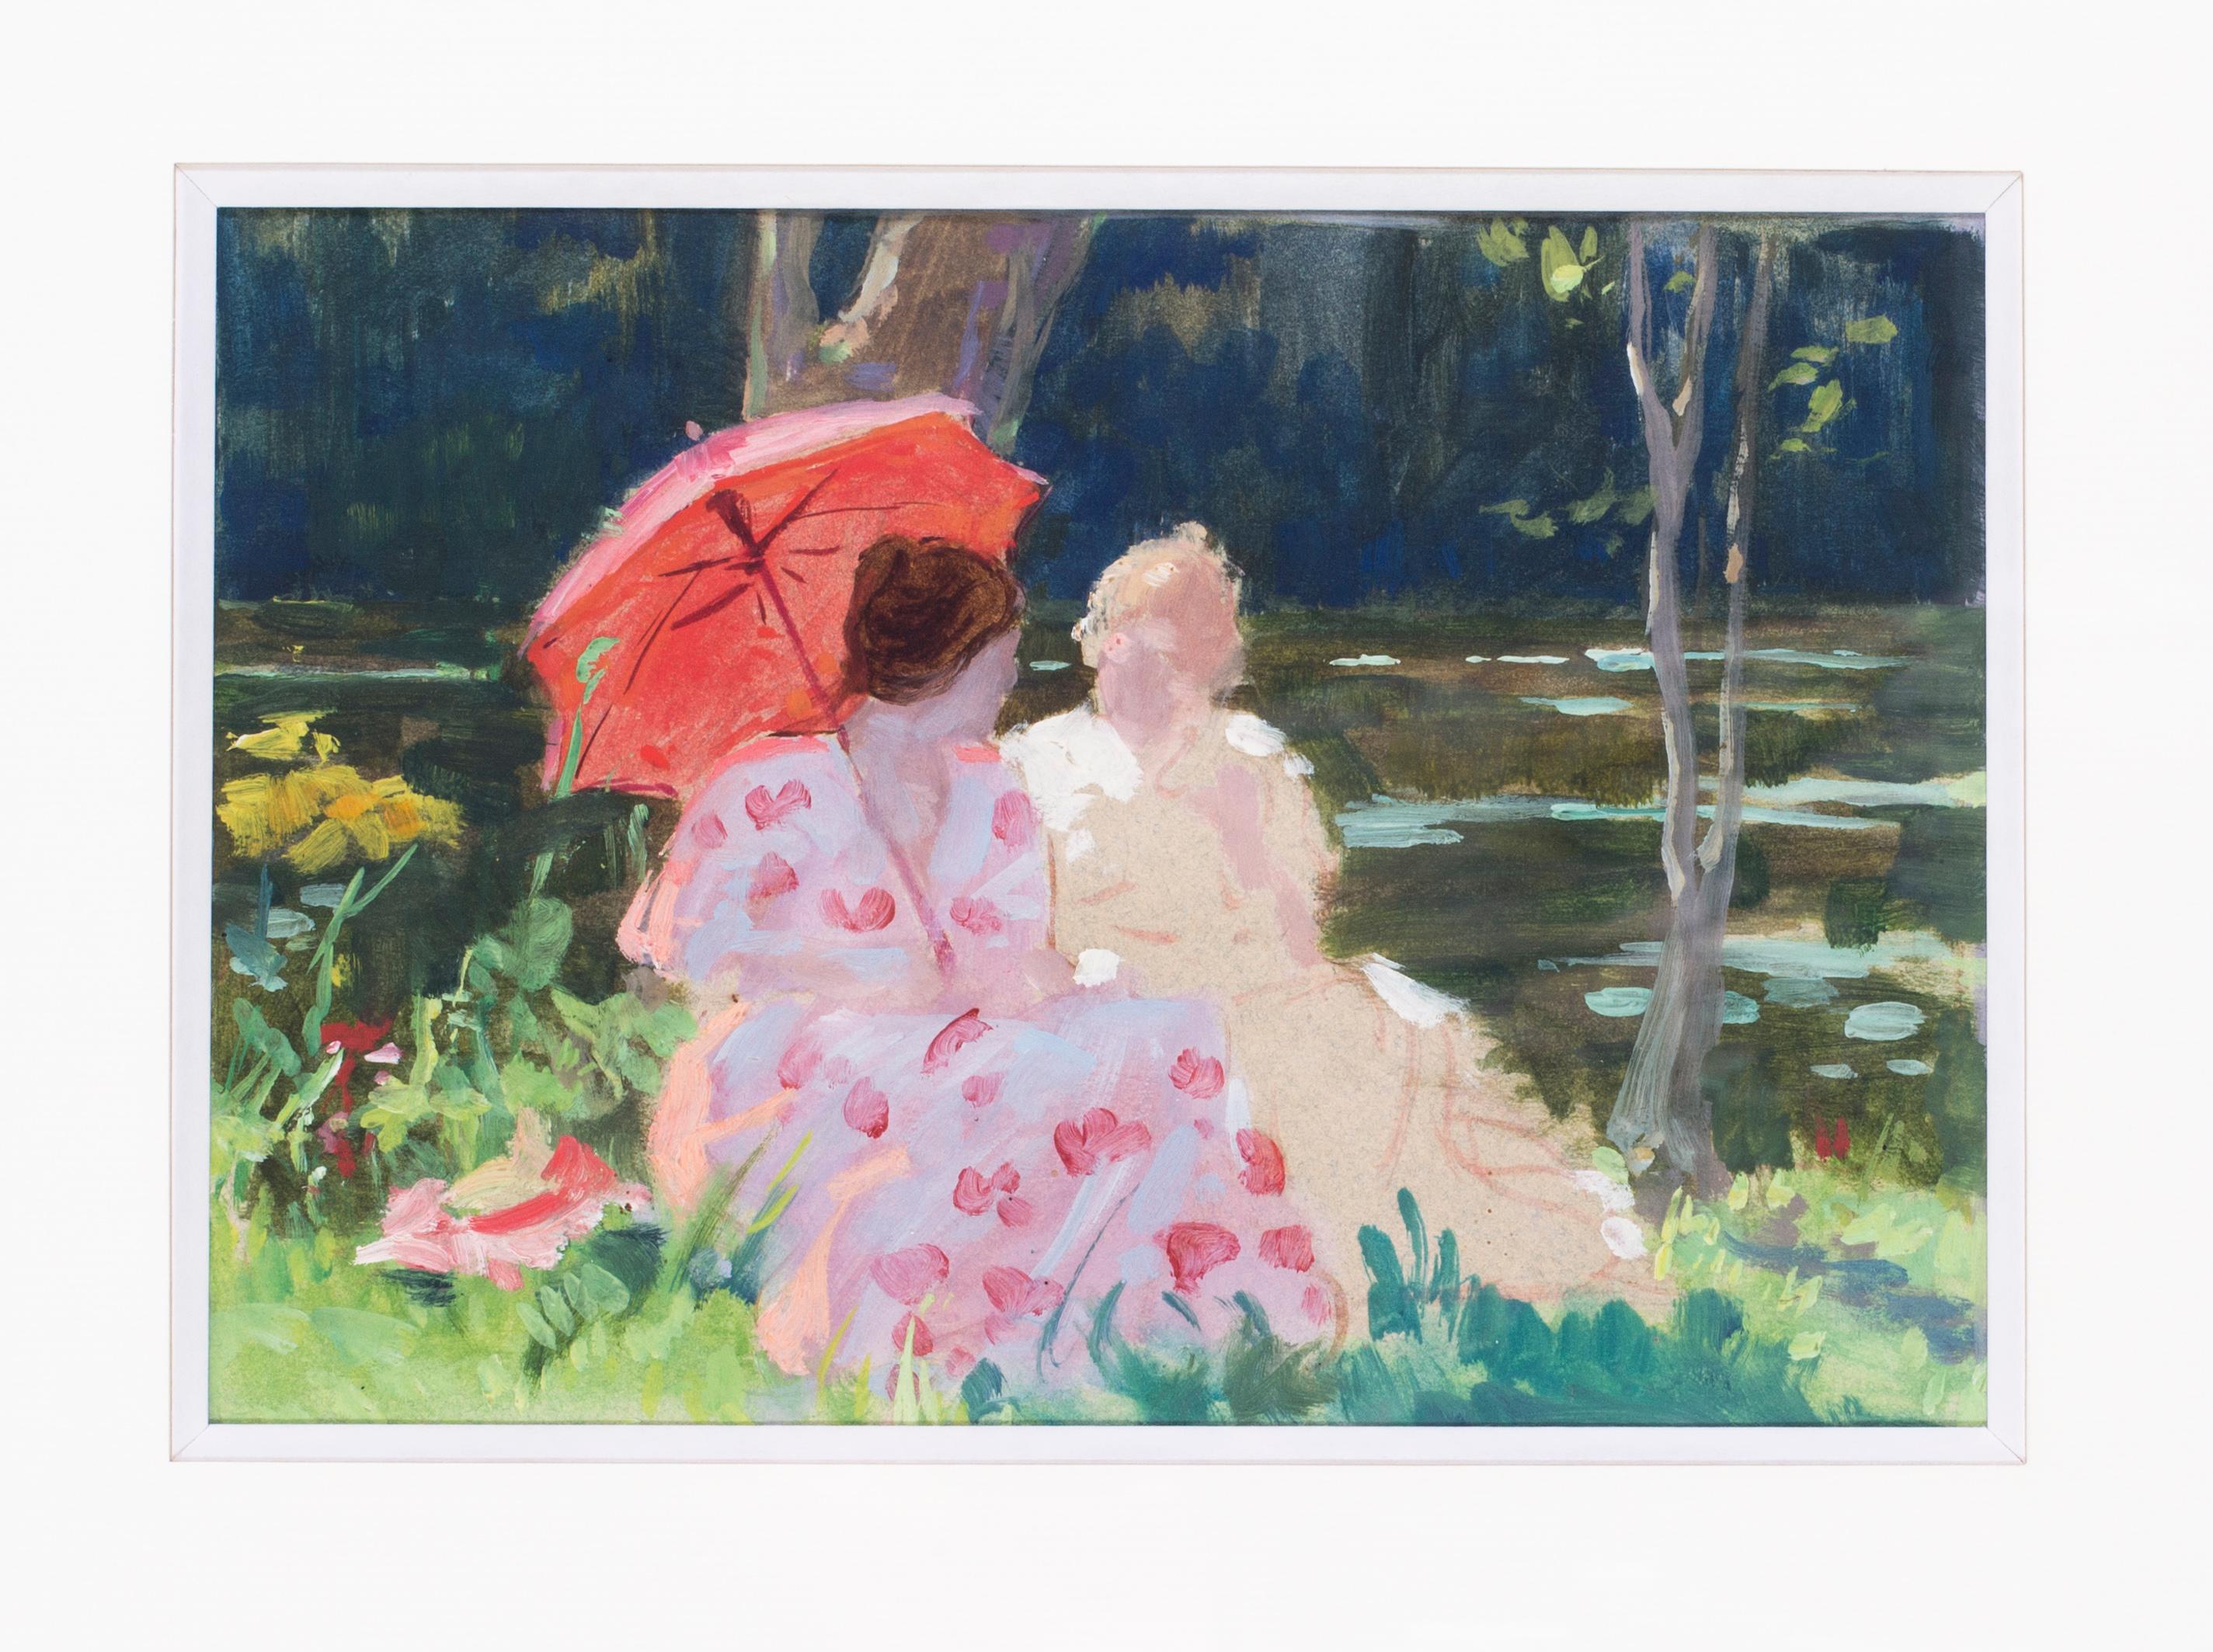 Apres le bain (After a swim), a stunning impressionist work - Art by Ludovic Alleaume